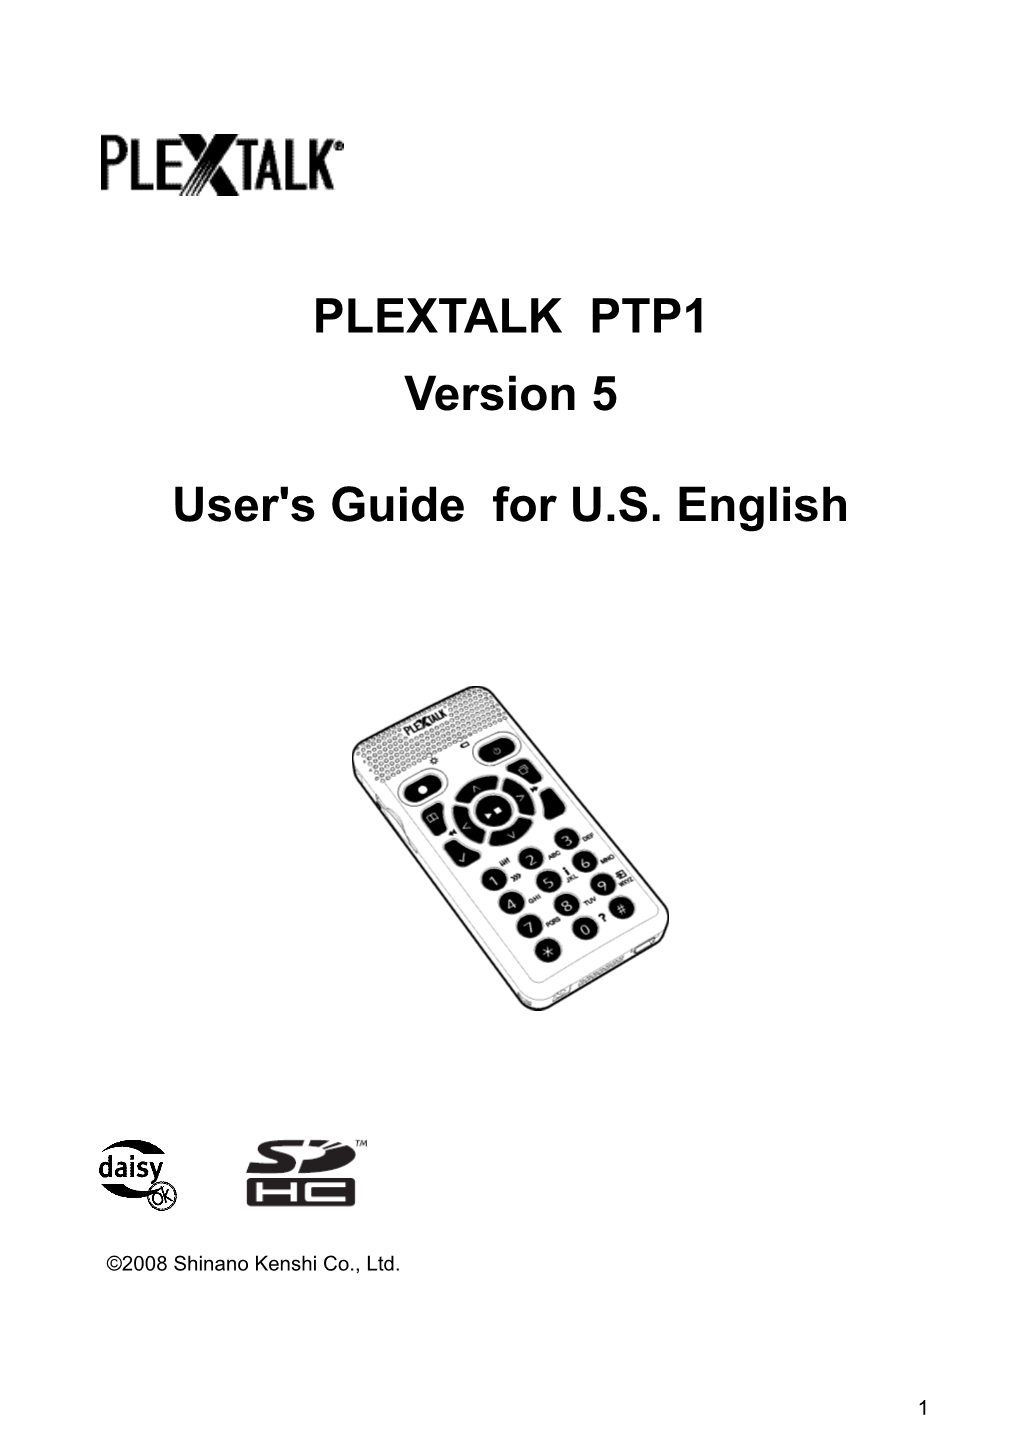 User's Guide for U.S. English